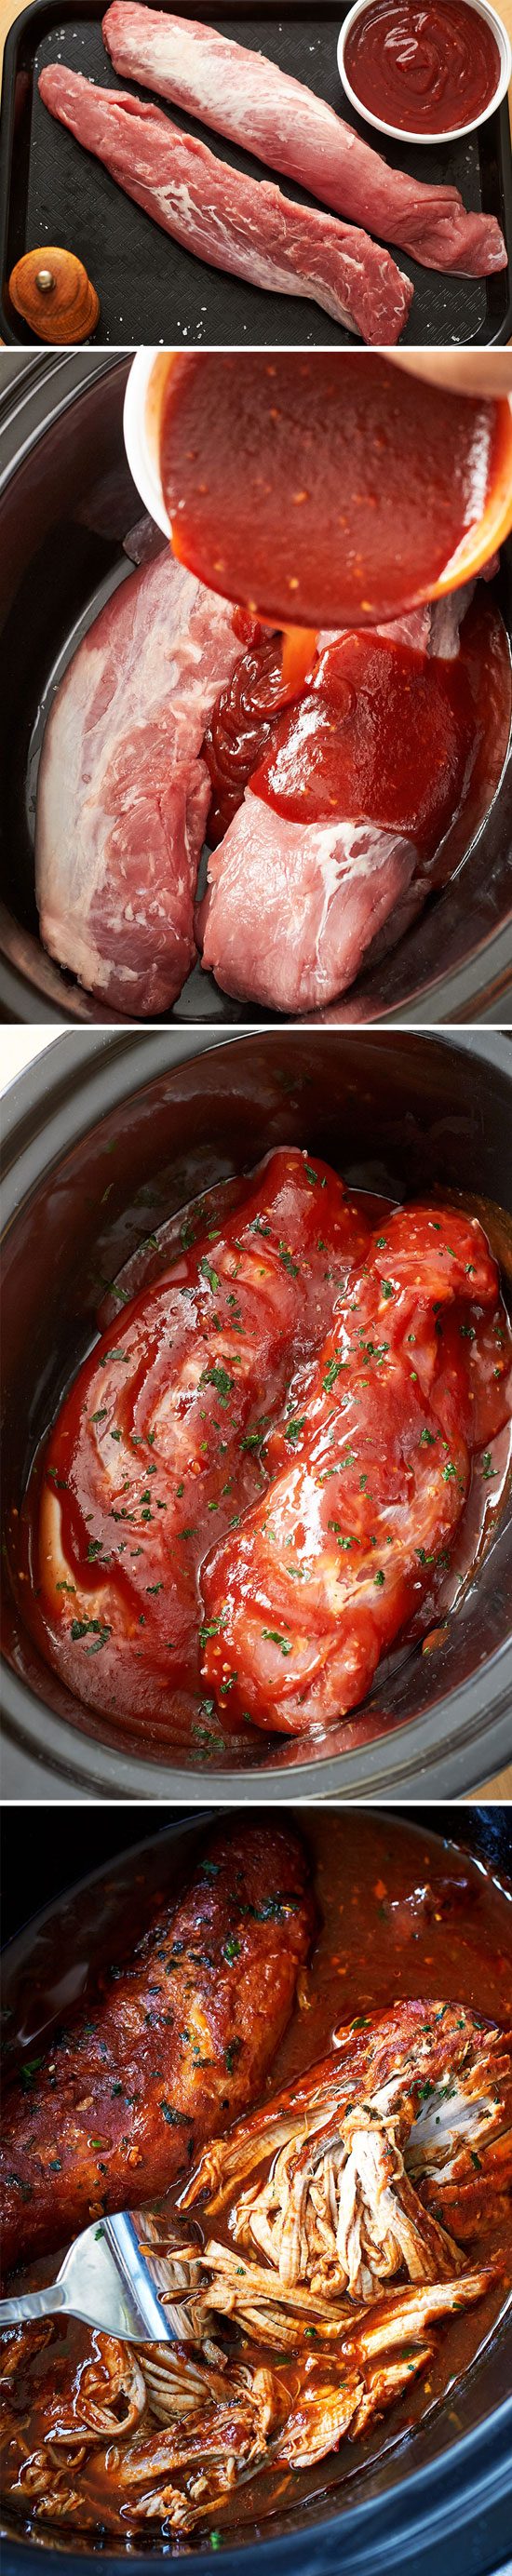 Slow Cooker BBQ Pork – The most amazing FALL-APART TENDER pork goodness! Cooked low and slow right in the crockpot!